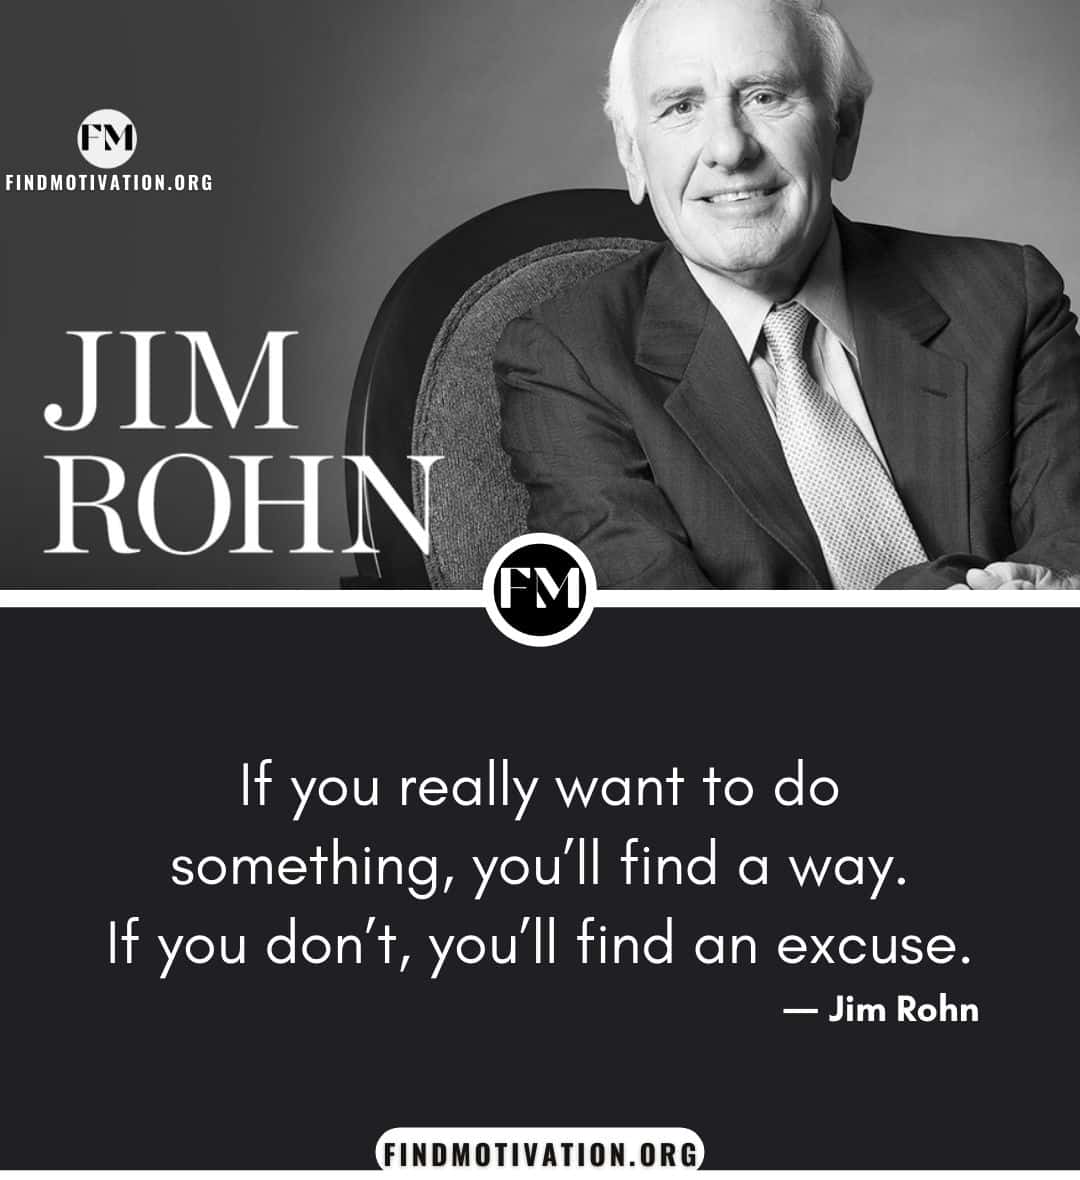 Jim Rohn's Quotes about success to learn what is a success and what you have to do for achieving it